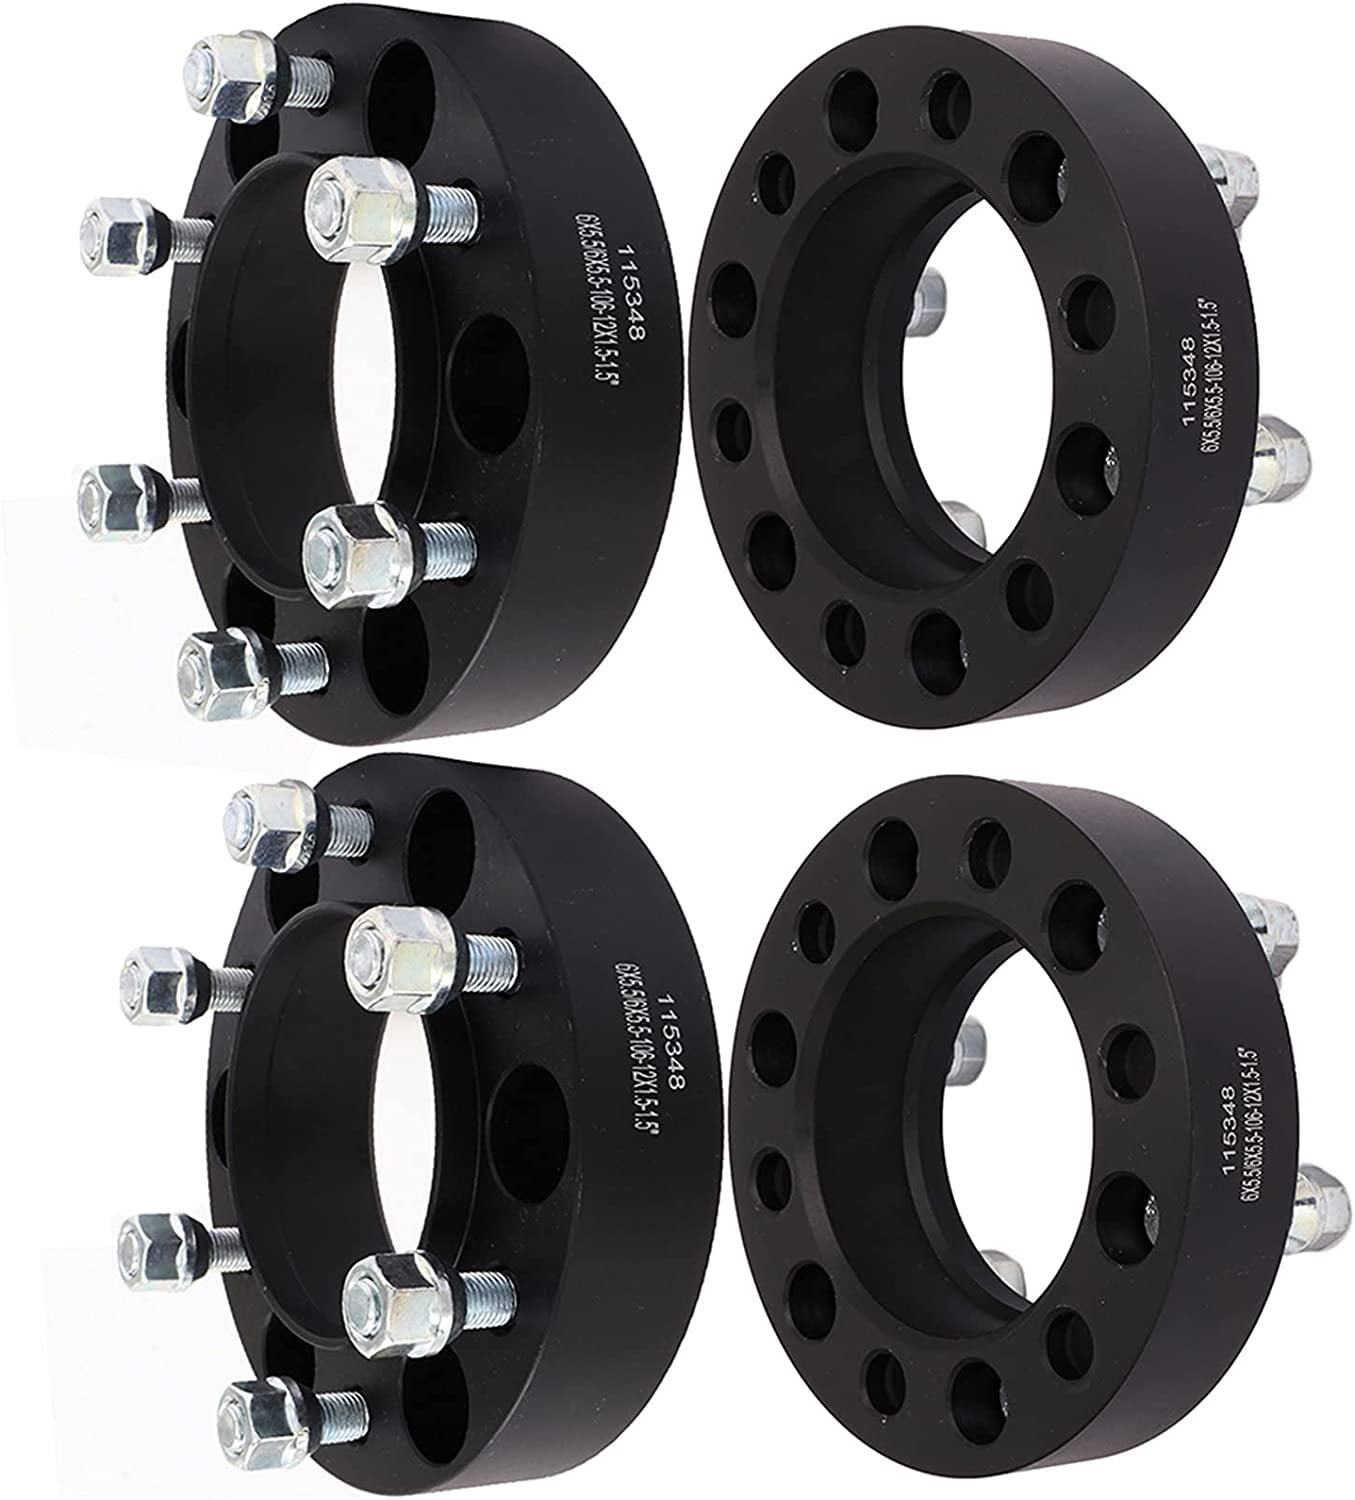 6x5.5 Wheel Spacers Compatible with Tacoma Tundra 4 Runner Thread-Locking Adhensives. 2 inch 6x139.7 Hubcentric Wheel Spacers 106 Hub Bore with 12x1.5 ET Lug Nuts 